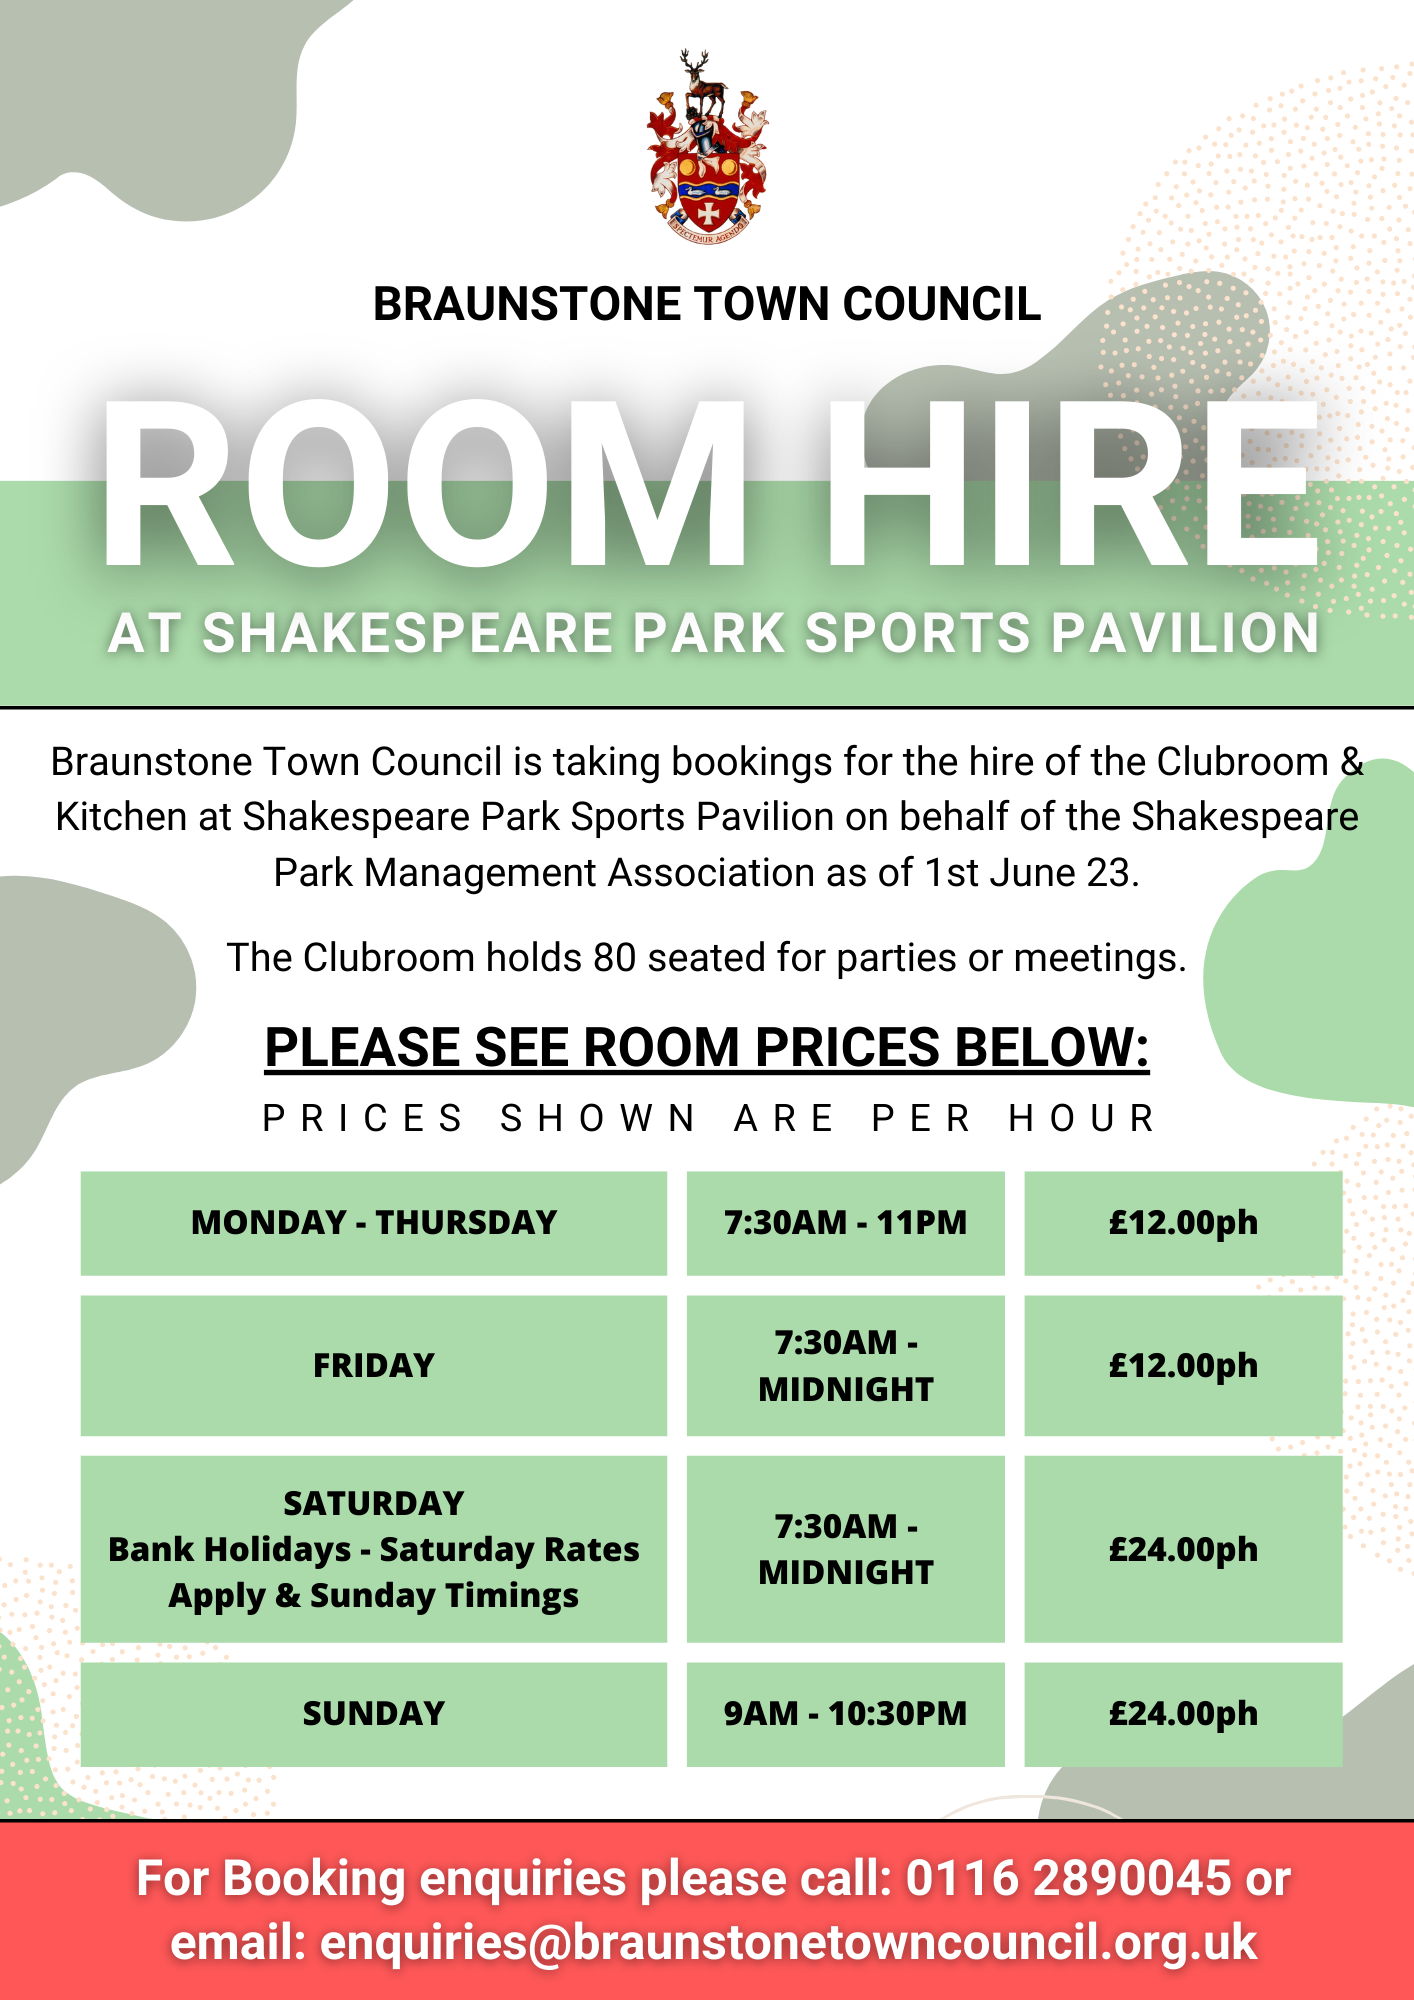 Bookings shall be being taken for the hire of the Clubroom Kitchen at Shakespeare Park Sports Pavilion as of 1st June 23 by calling 0116 2890045 or emailing enquiriesbraunstonetowncouncil.org.uk Prices 